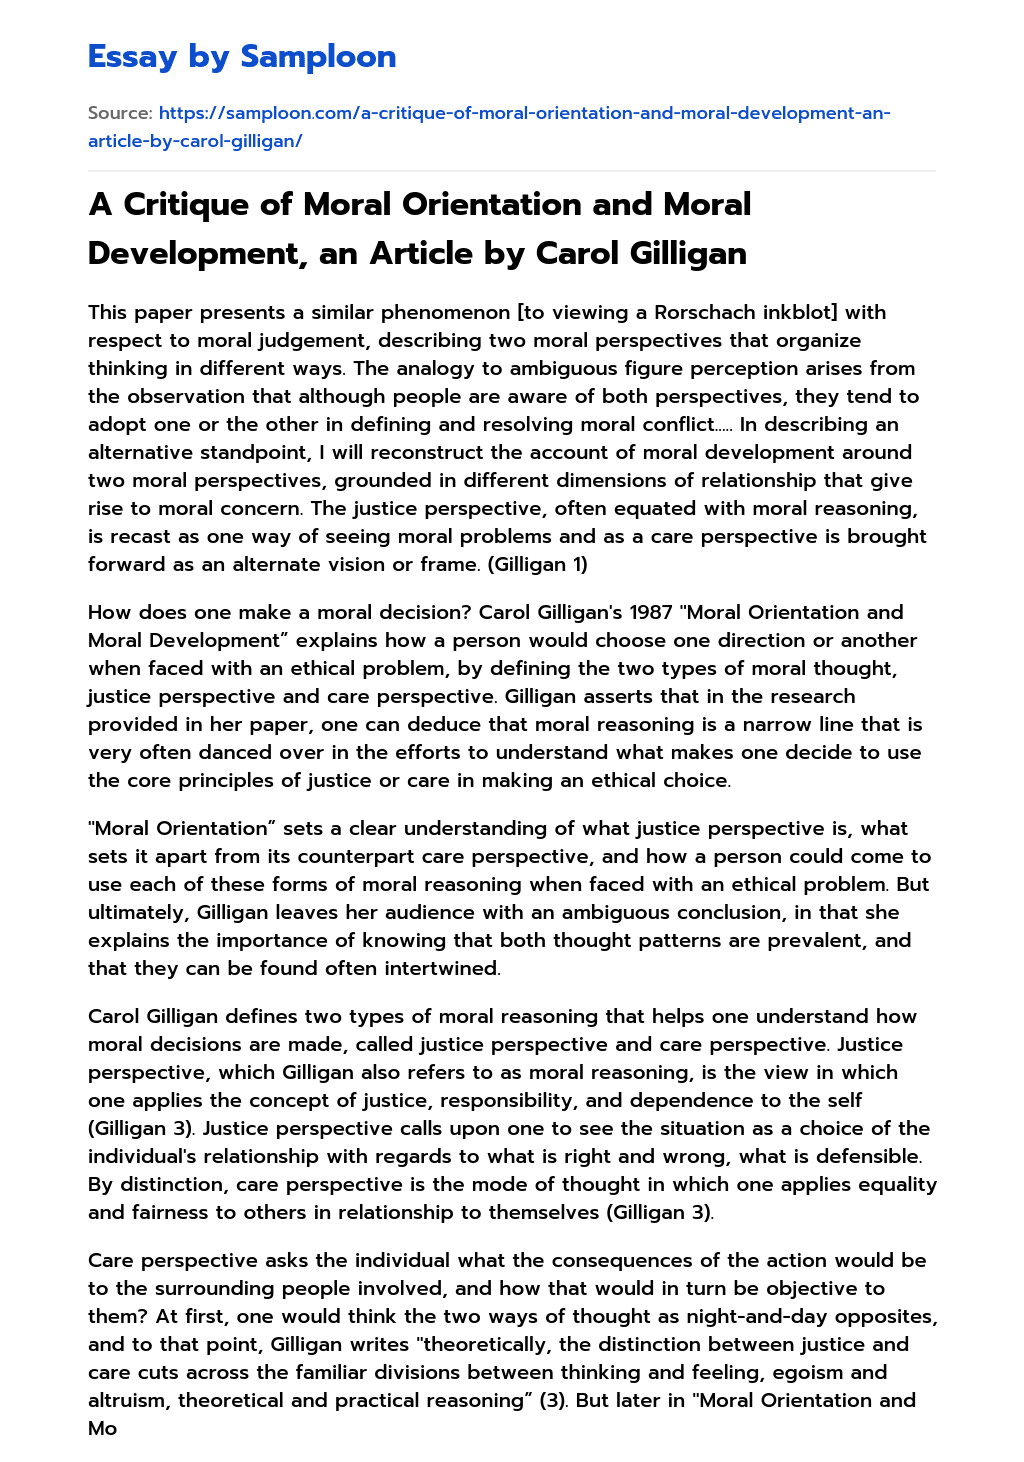 A Critique of Moral Orientation and Moral Development, an Article by Carol Gilligan essay